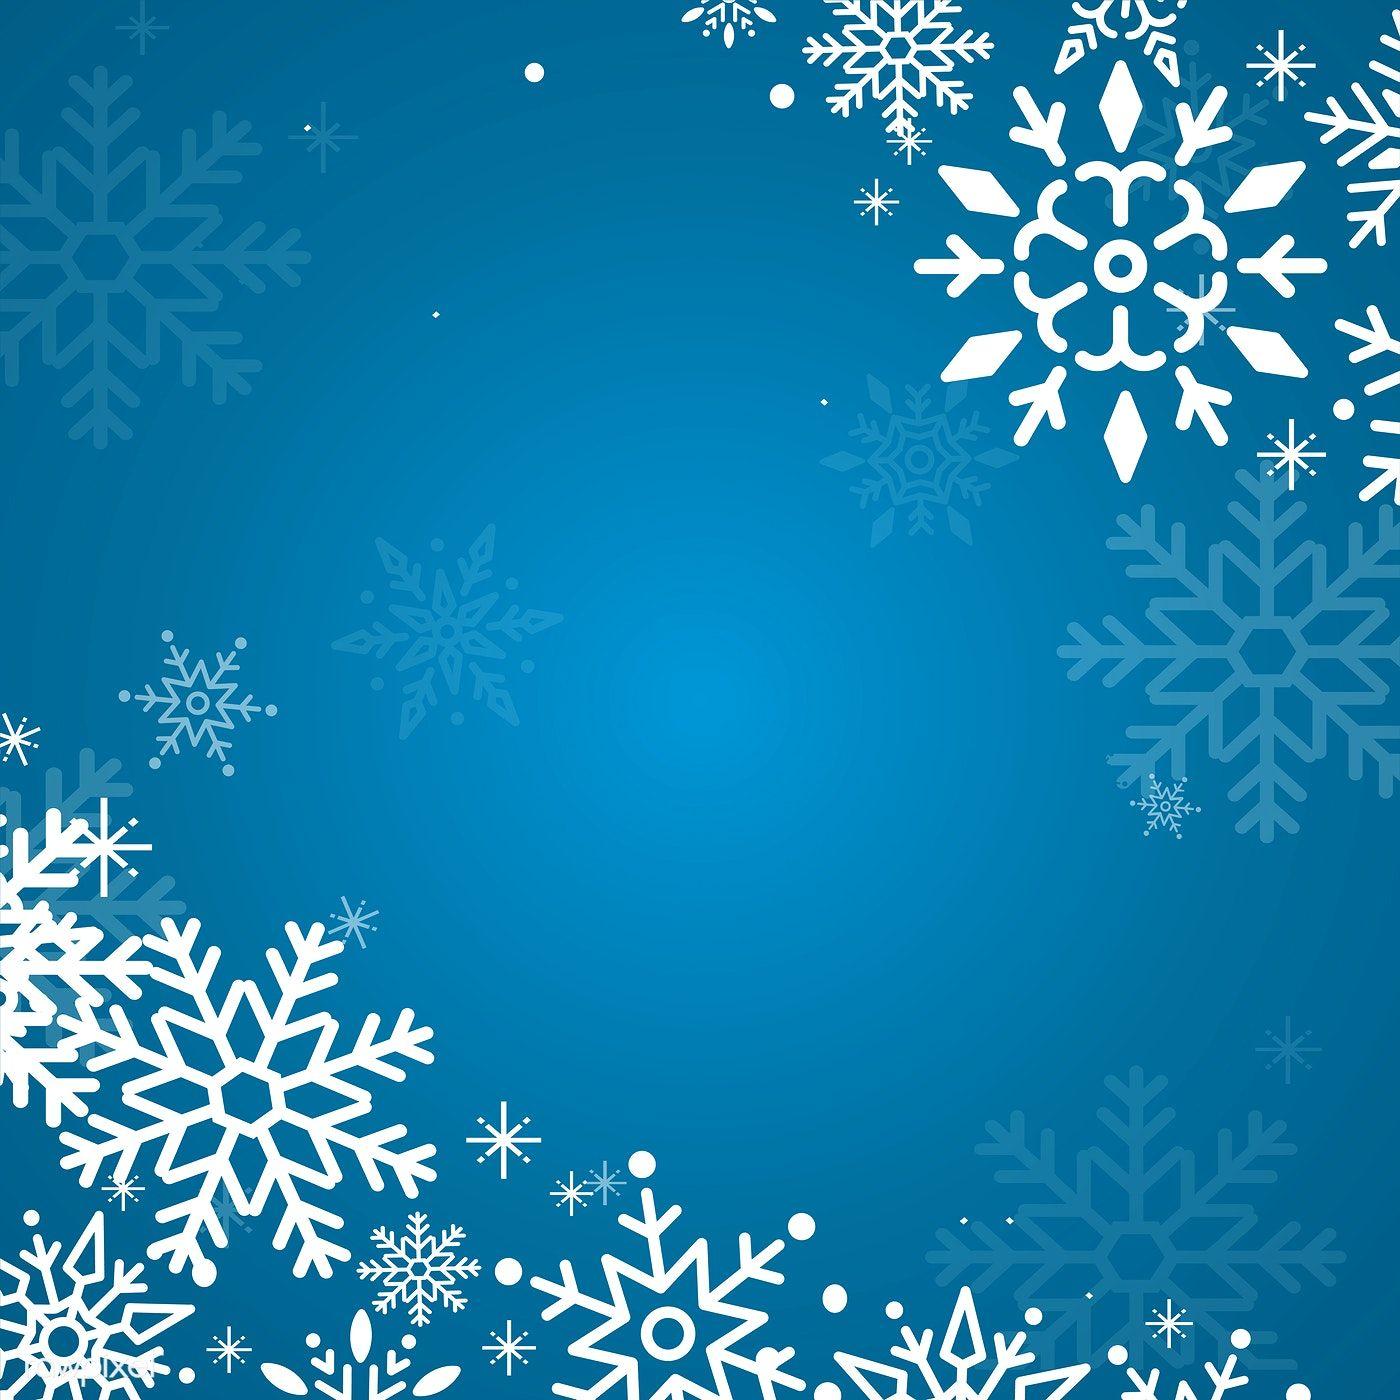 Blue Christmas winter holiday background with snowflake